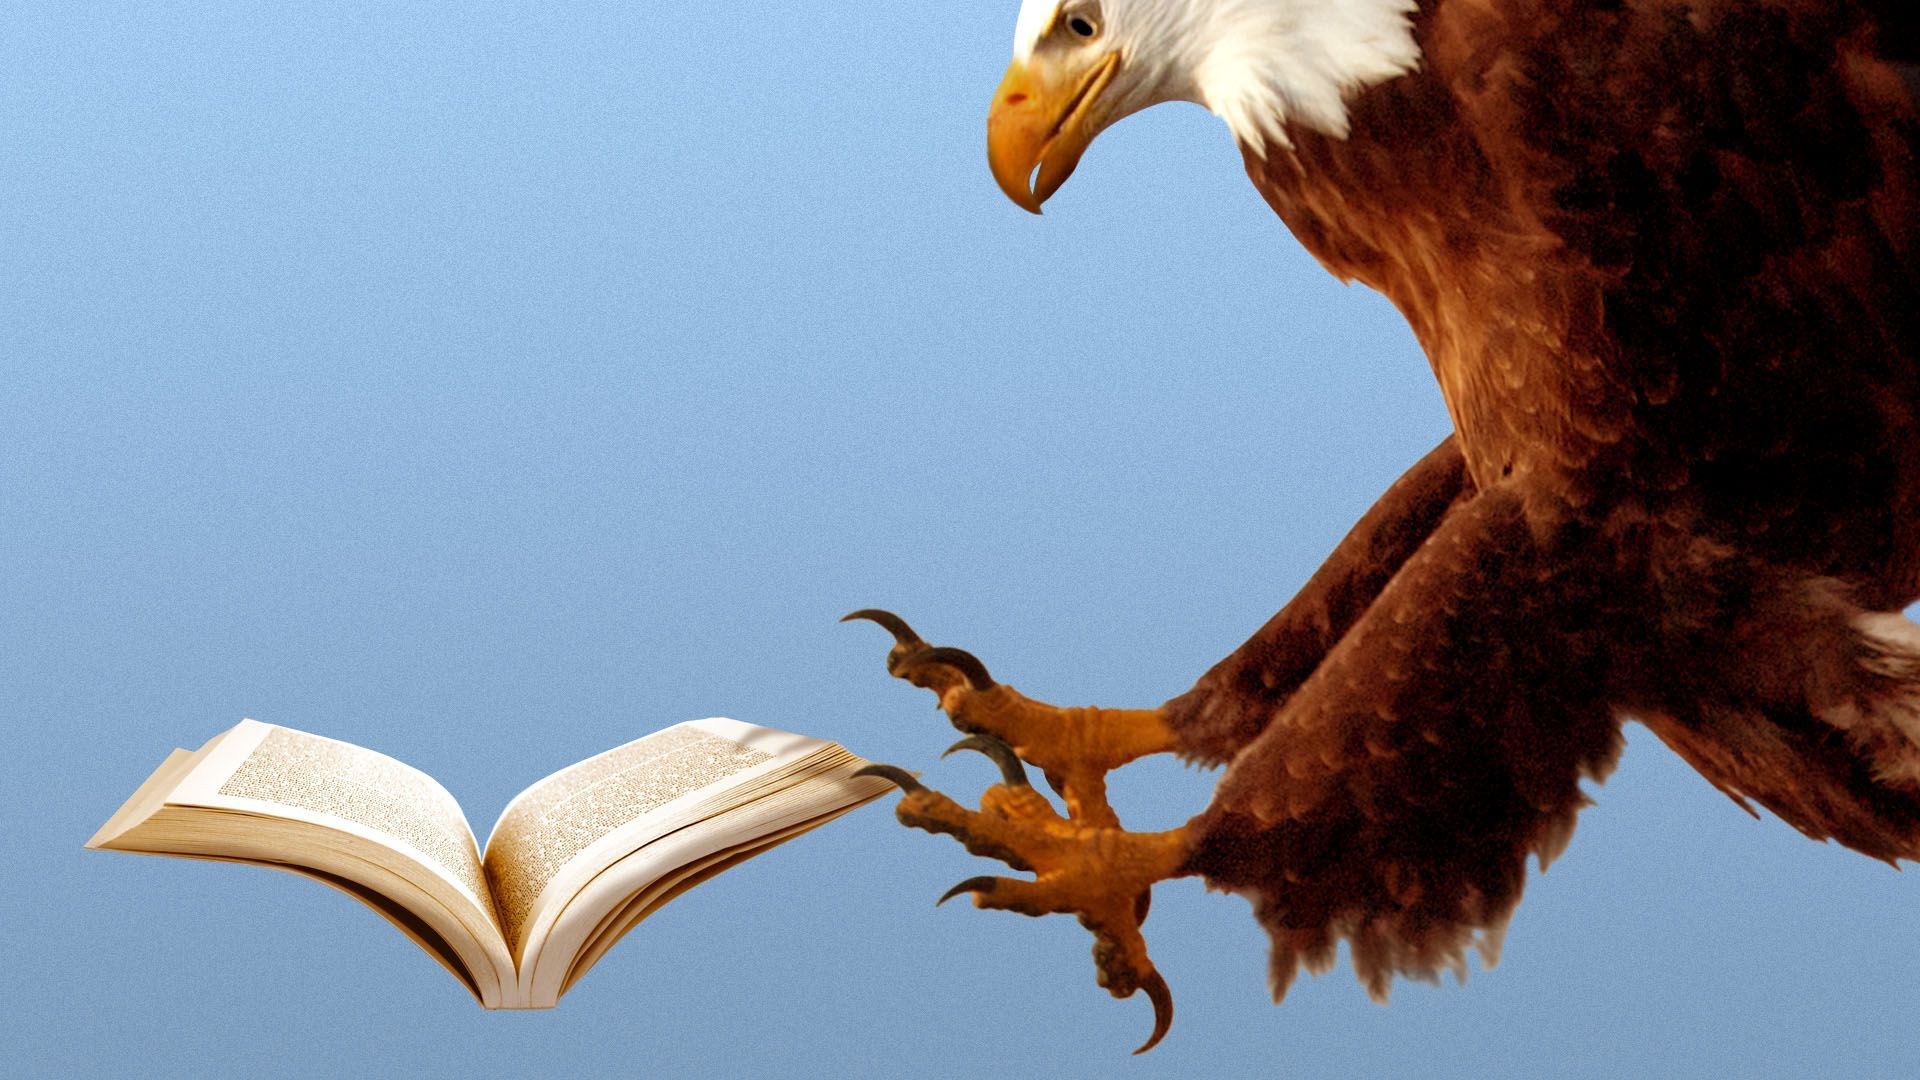 Illustration of a flying eagle about to grab a book